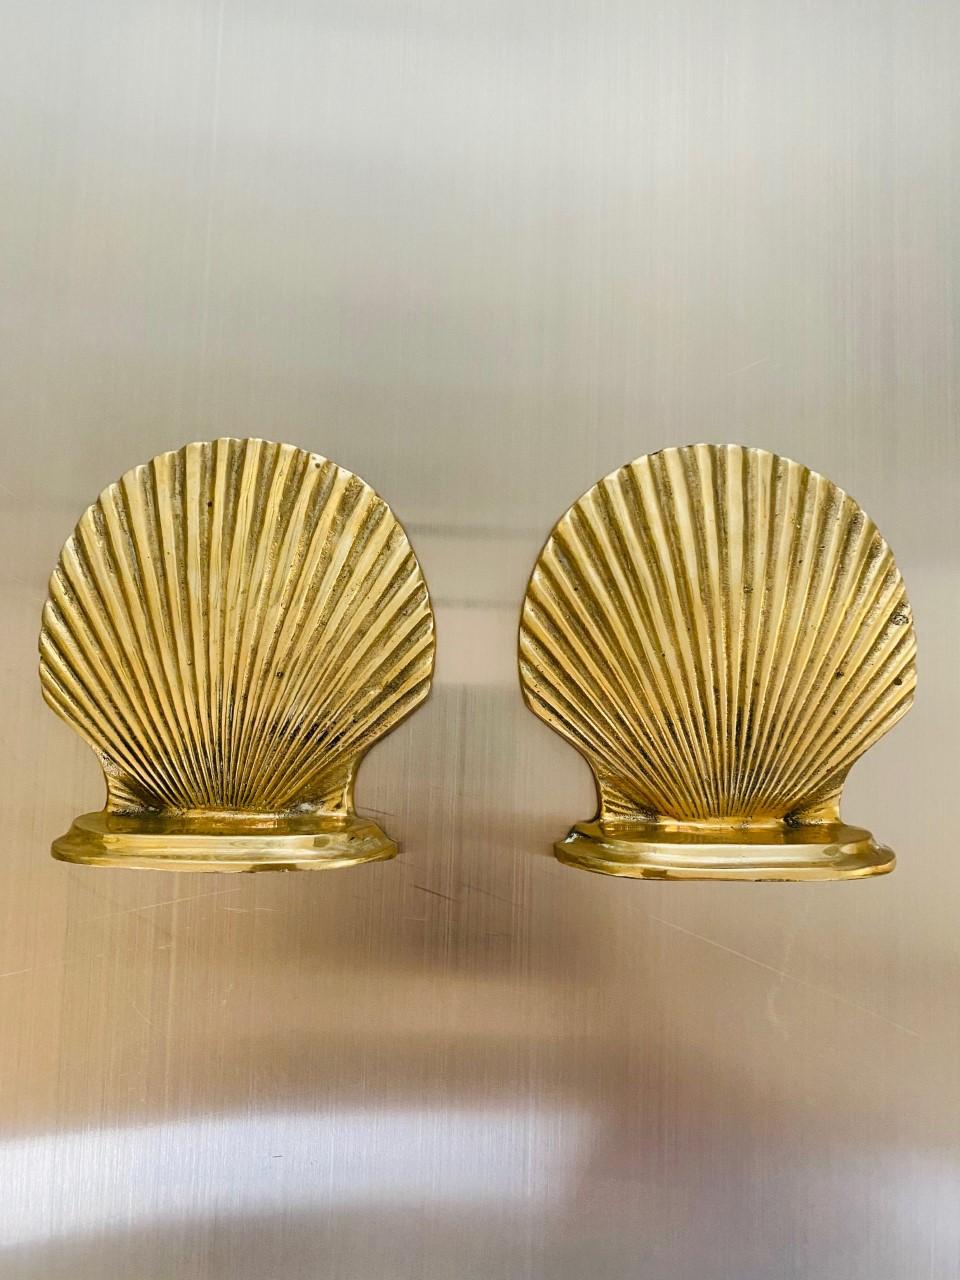 Pair of vintage brass sea shell bookends, circa 1970s. This beautiful pair of Hollywood Regency style sea shell bookends will brighten any space with their joyful gilt. This pair will enhance your mid-century, Hollywood Regency or eclectic decor